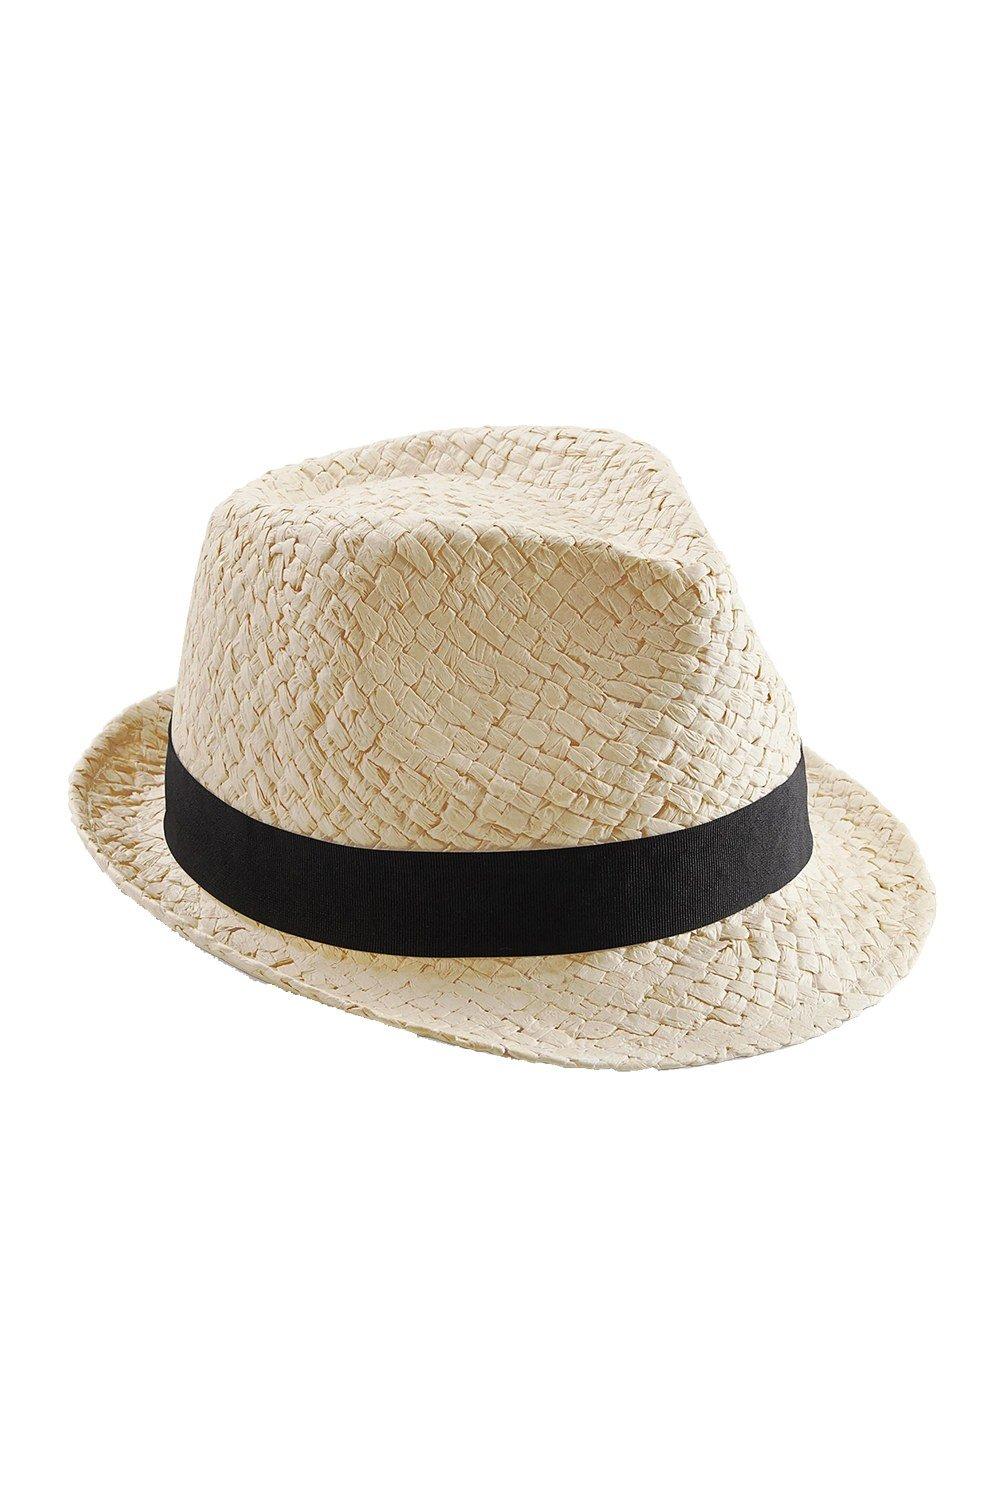 Beechfield Straw Festival Trilby Hat|Size: S/M|natural